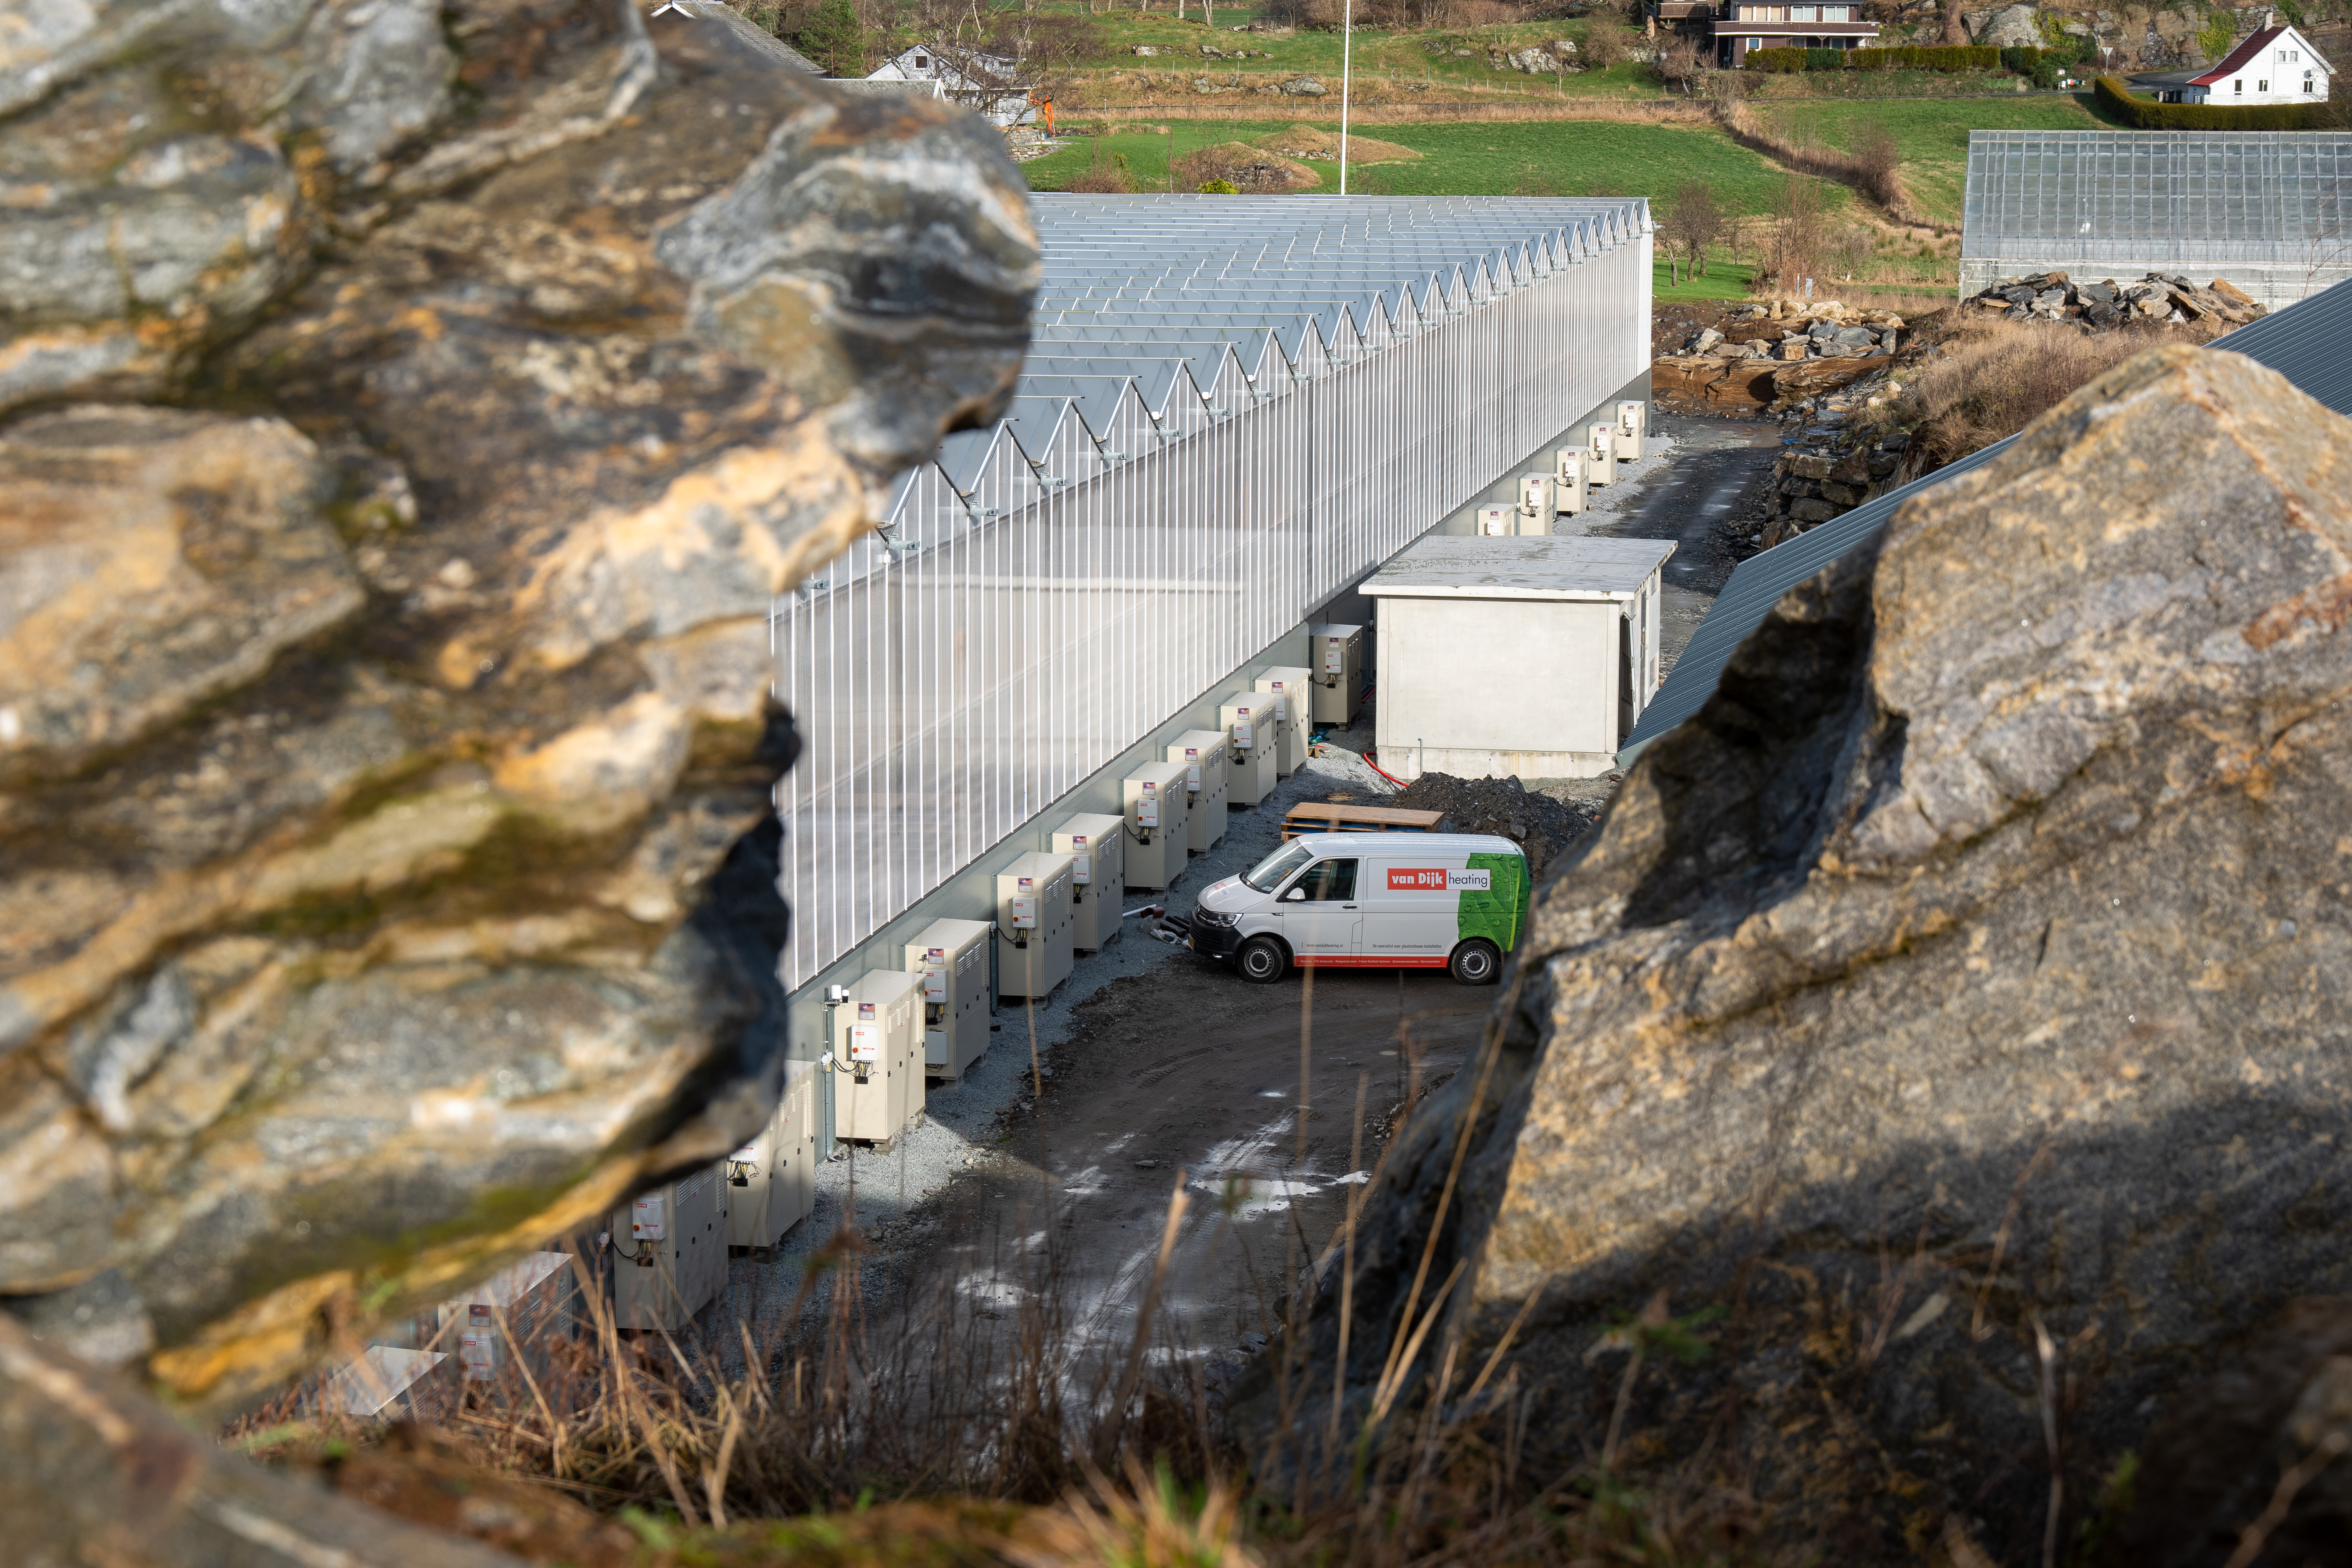 At Skavland Gartneri on the Norwegian island of Talgje, 23 AVS-wtw units provide a perfect climate at low energy costs.